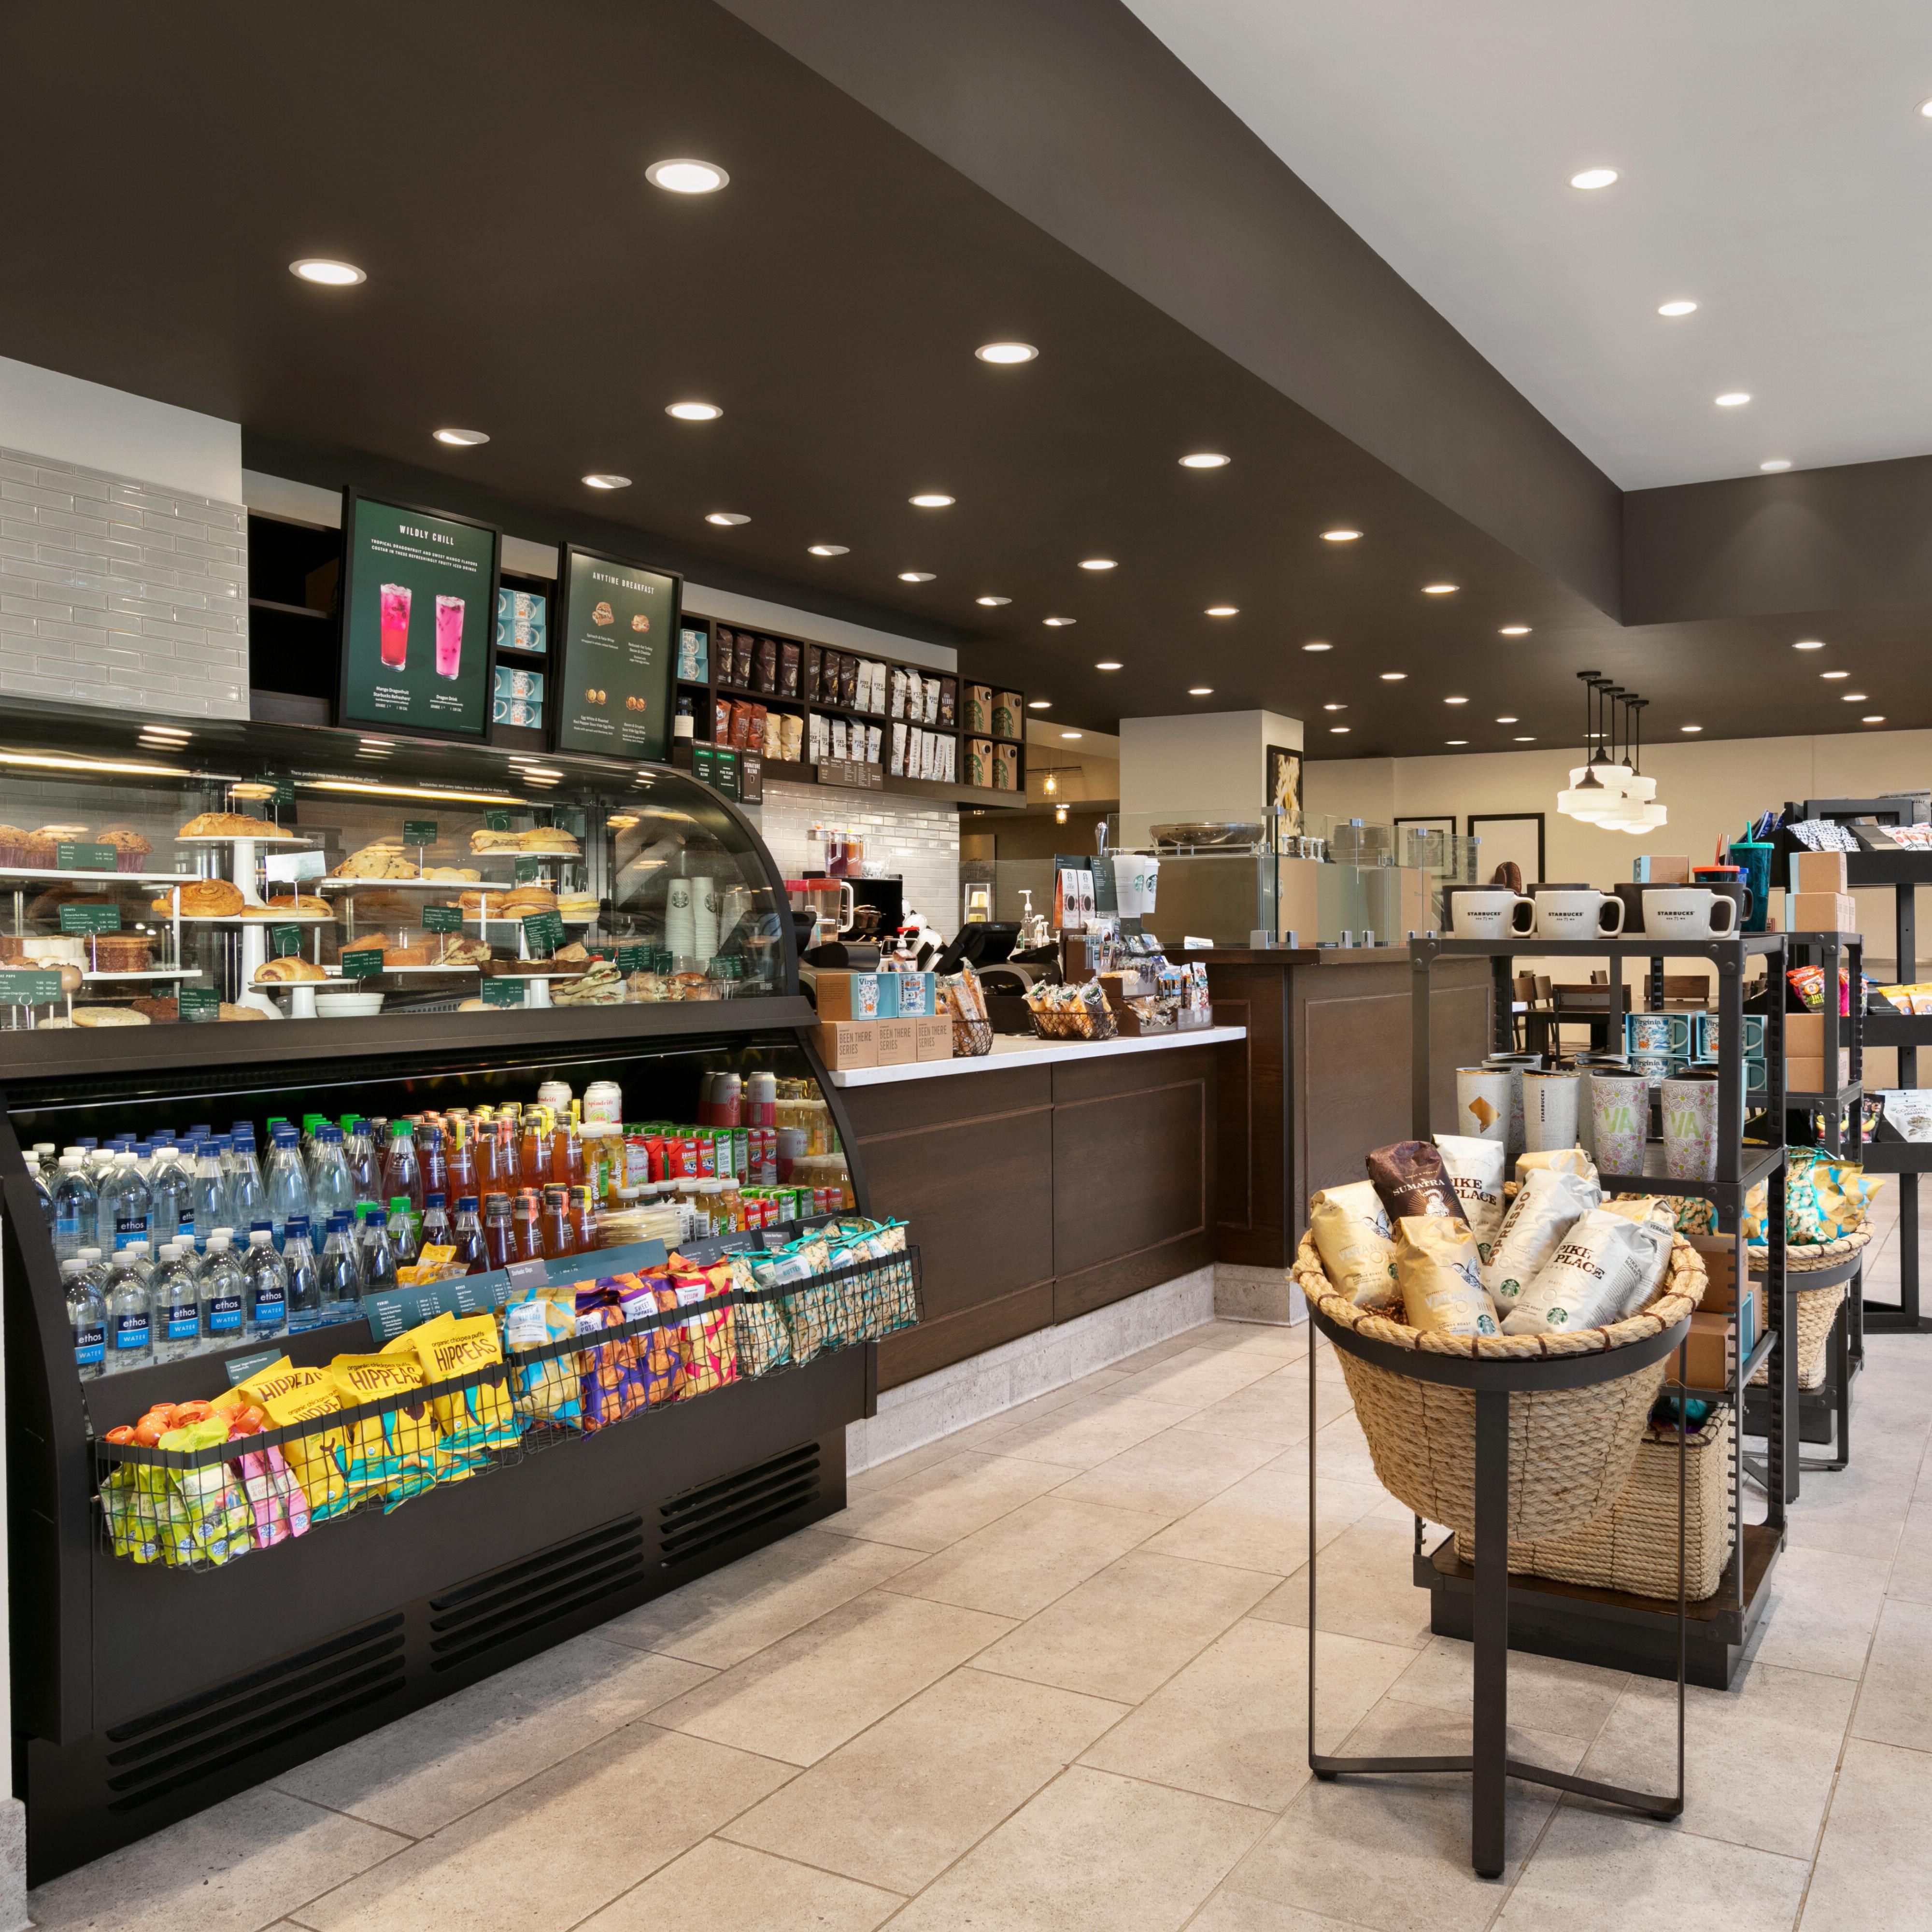 Enjoy your favorite coffee or a snack from our on-site Starbucks.